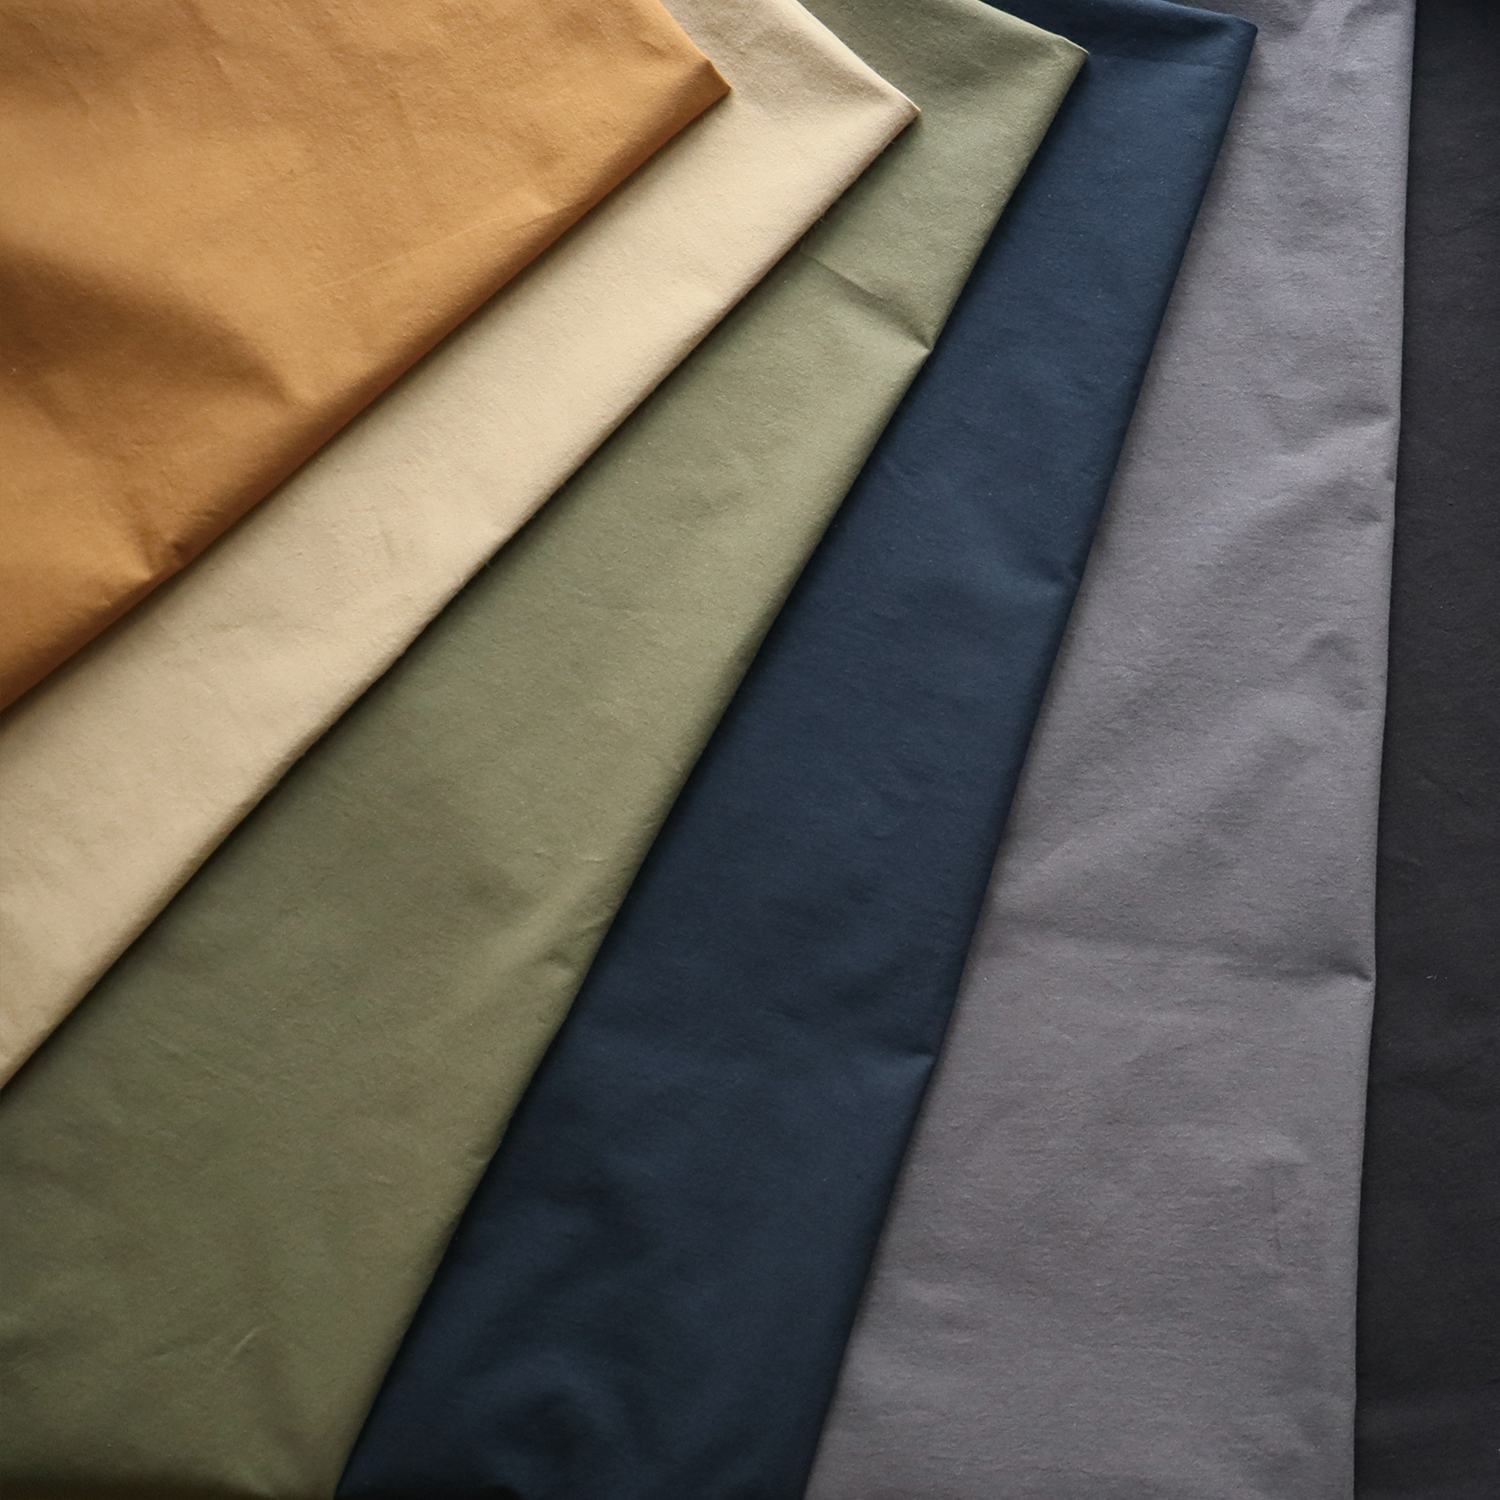 ■PSW2300H-12R　Vintage-like High Density Plain Weave Cotton Fabric, width approx.148cm , length 12m/roll  (roll)